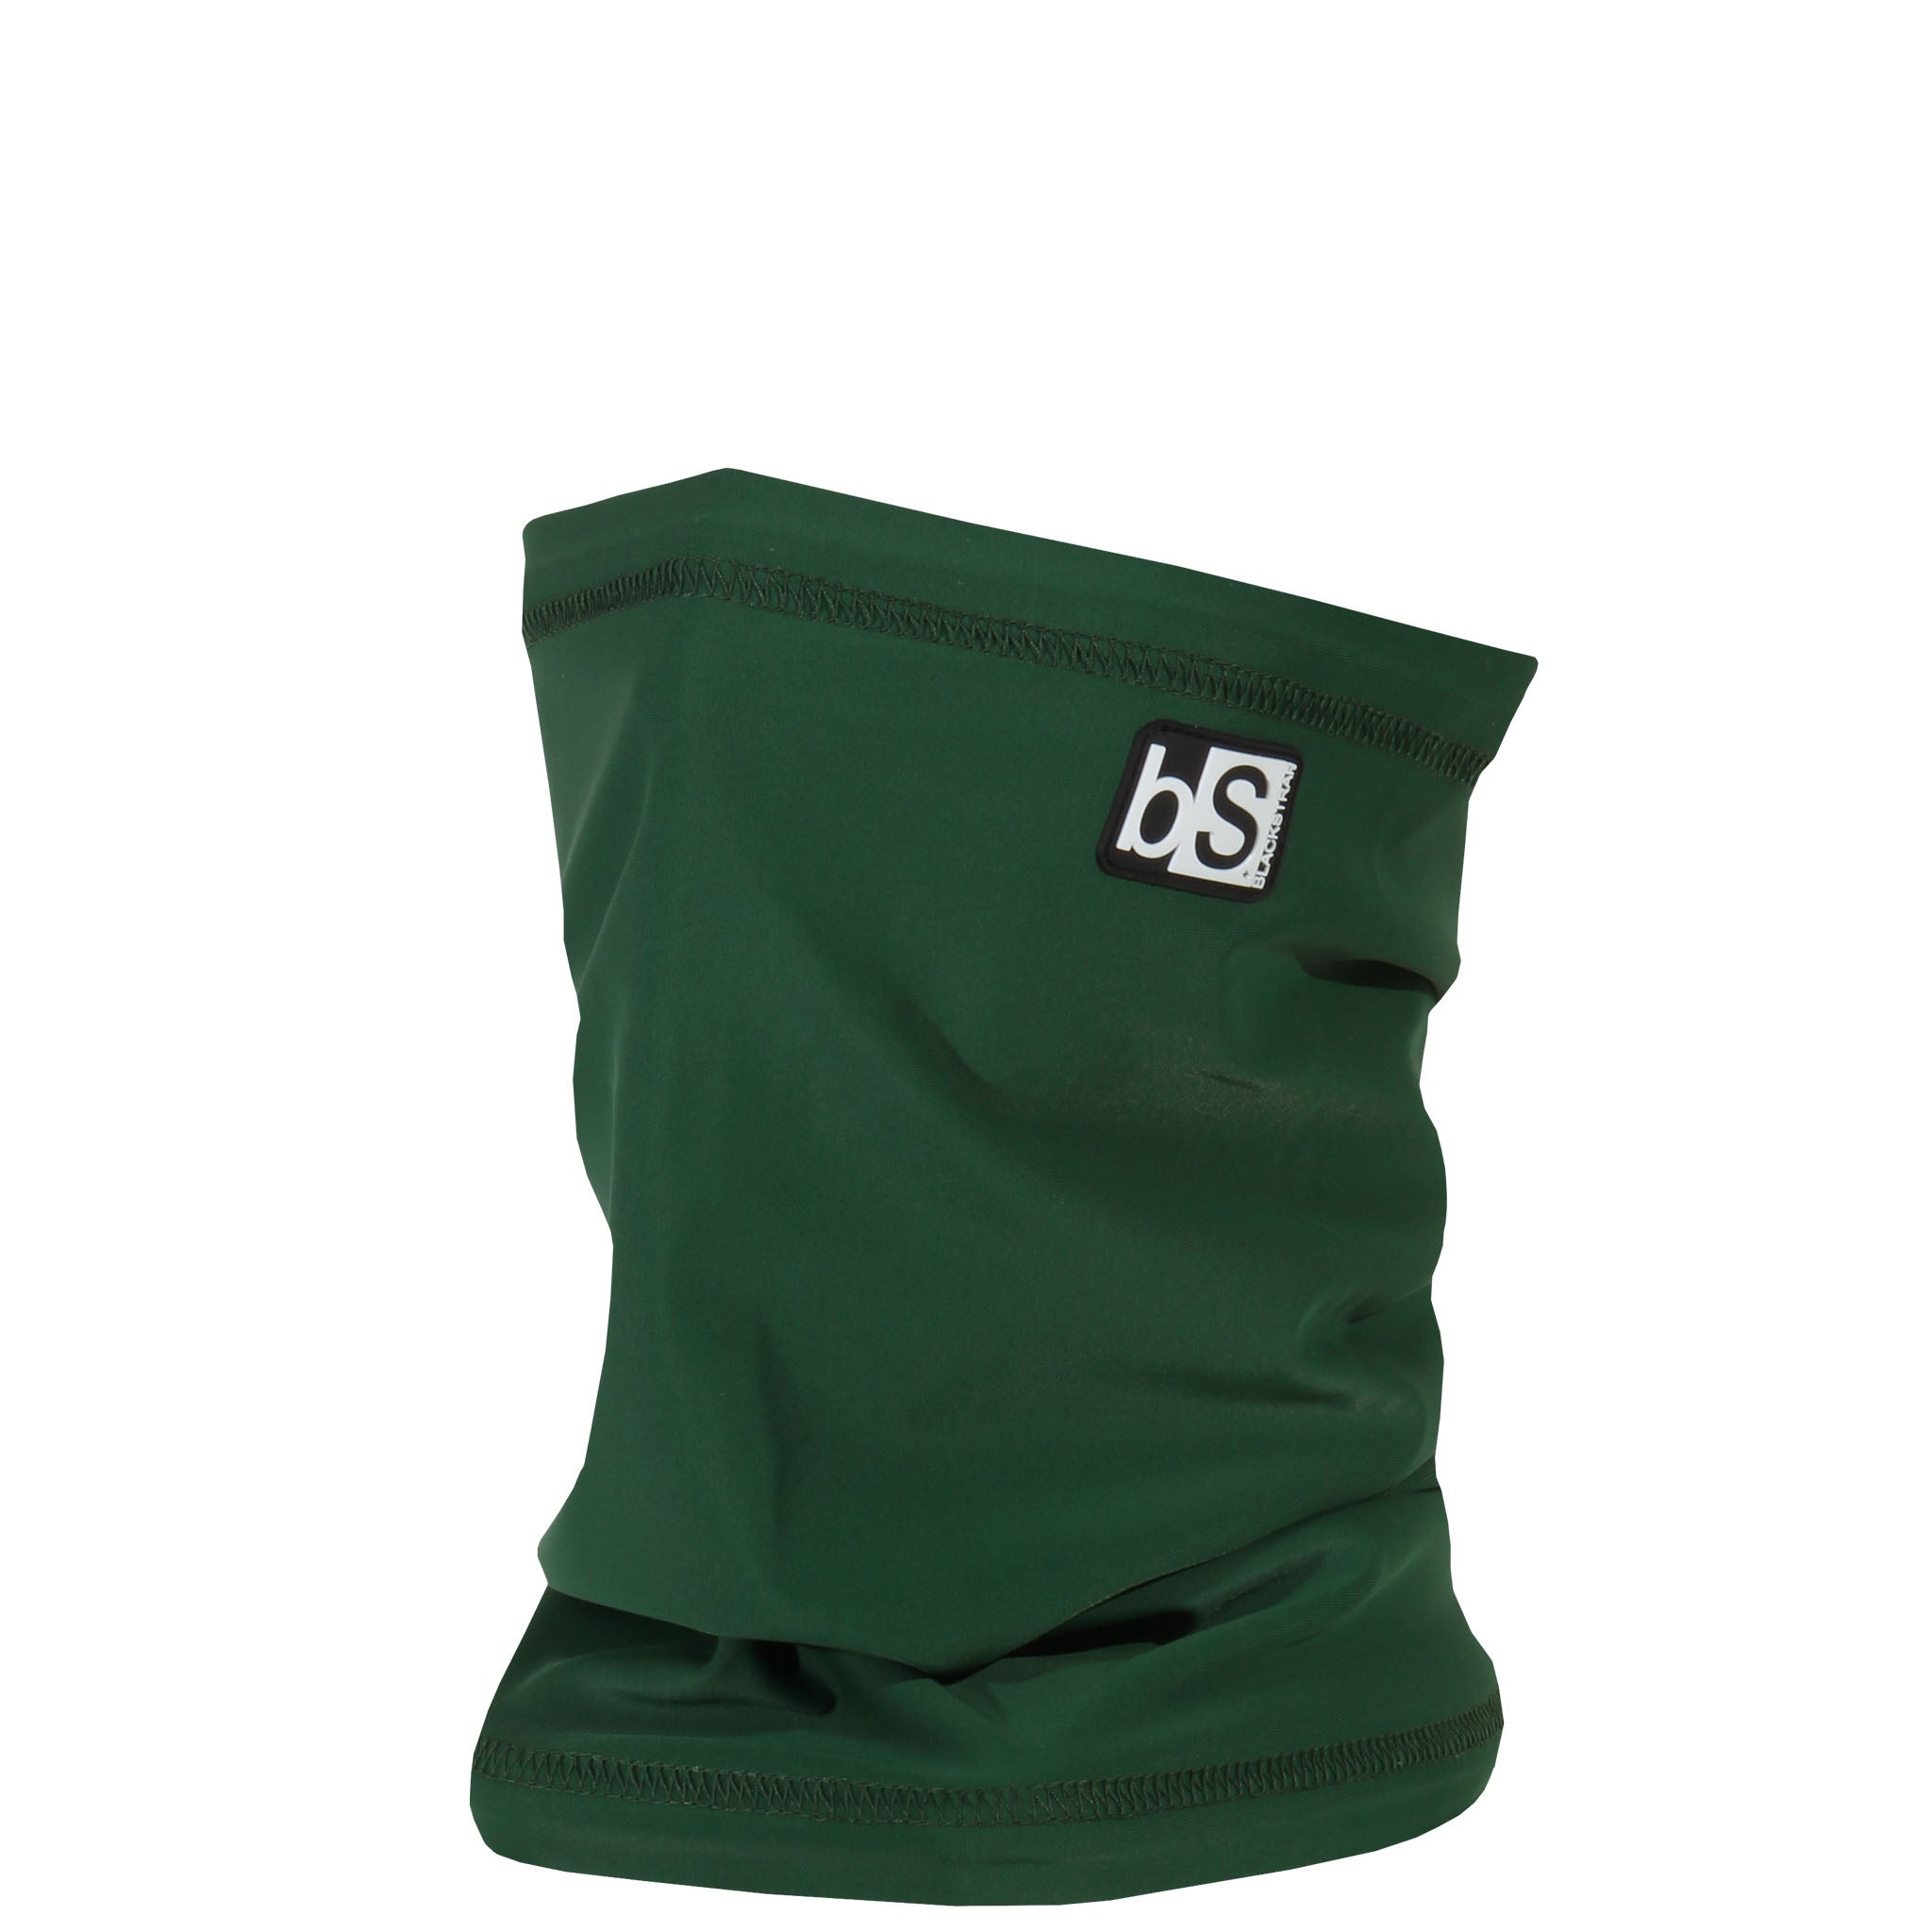 Dual Layer Tube Neck Warmer | Solids Blackstrap Forest Green  